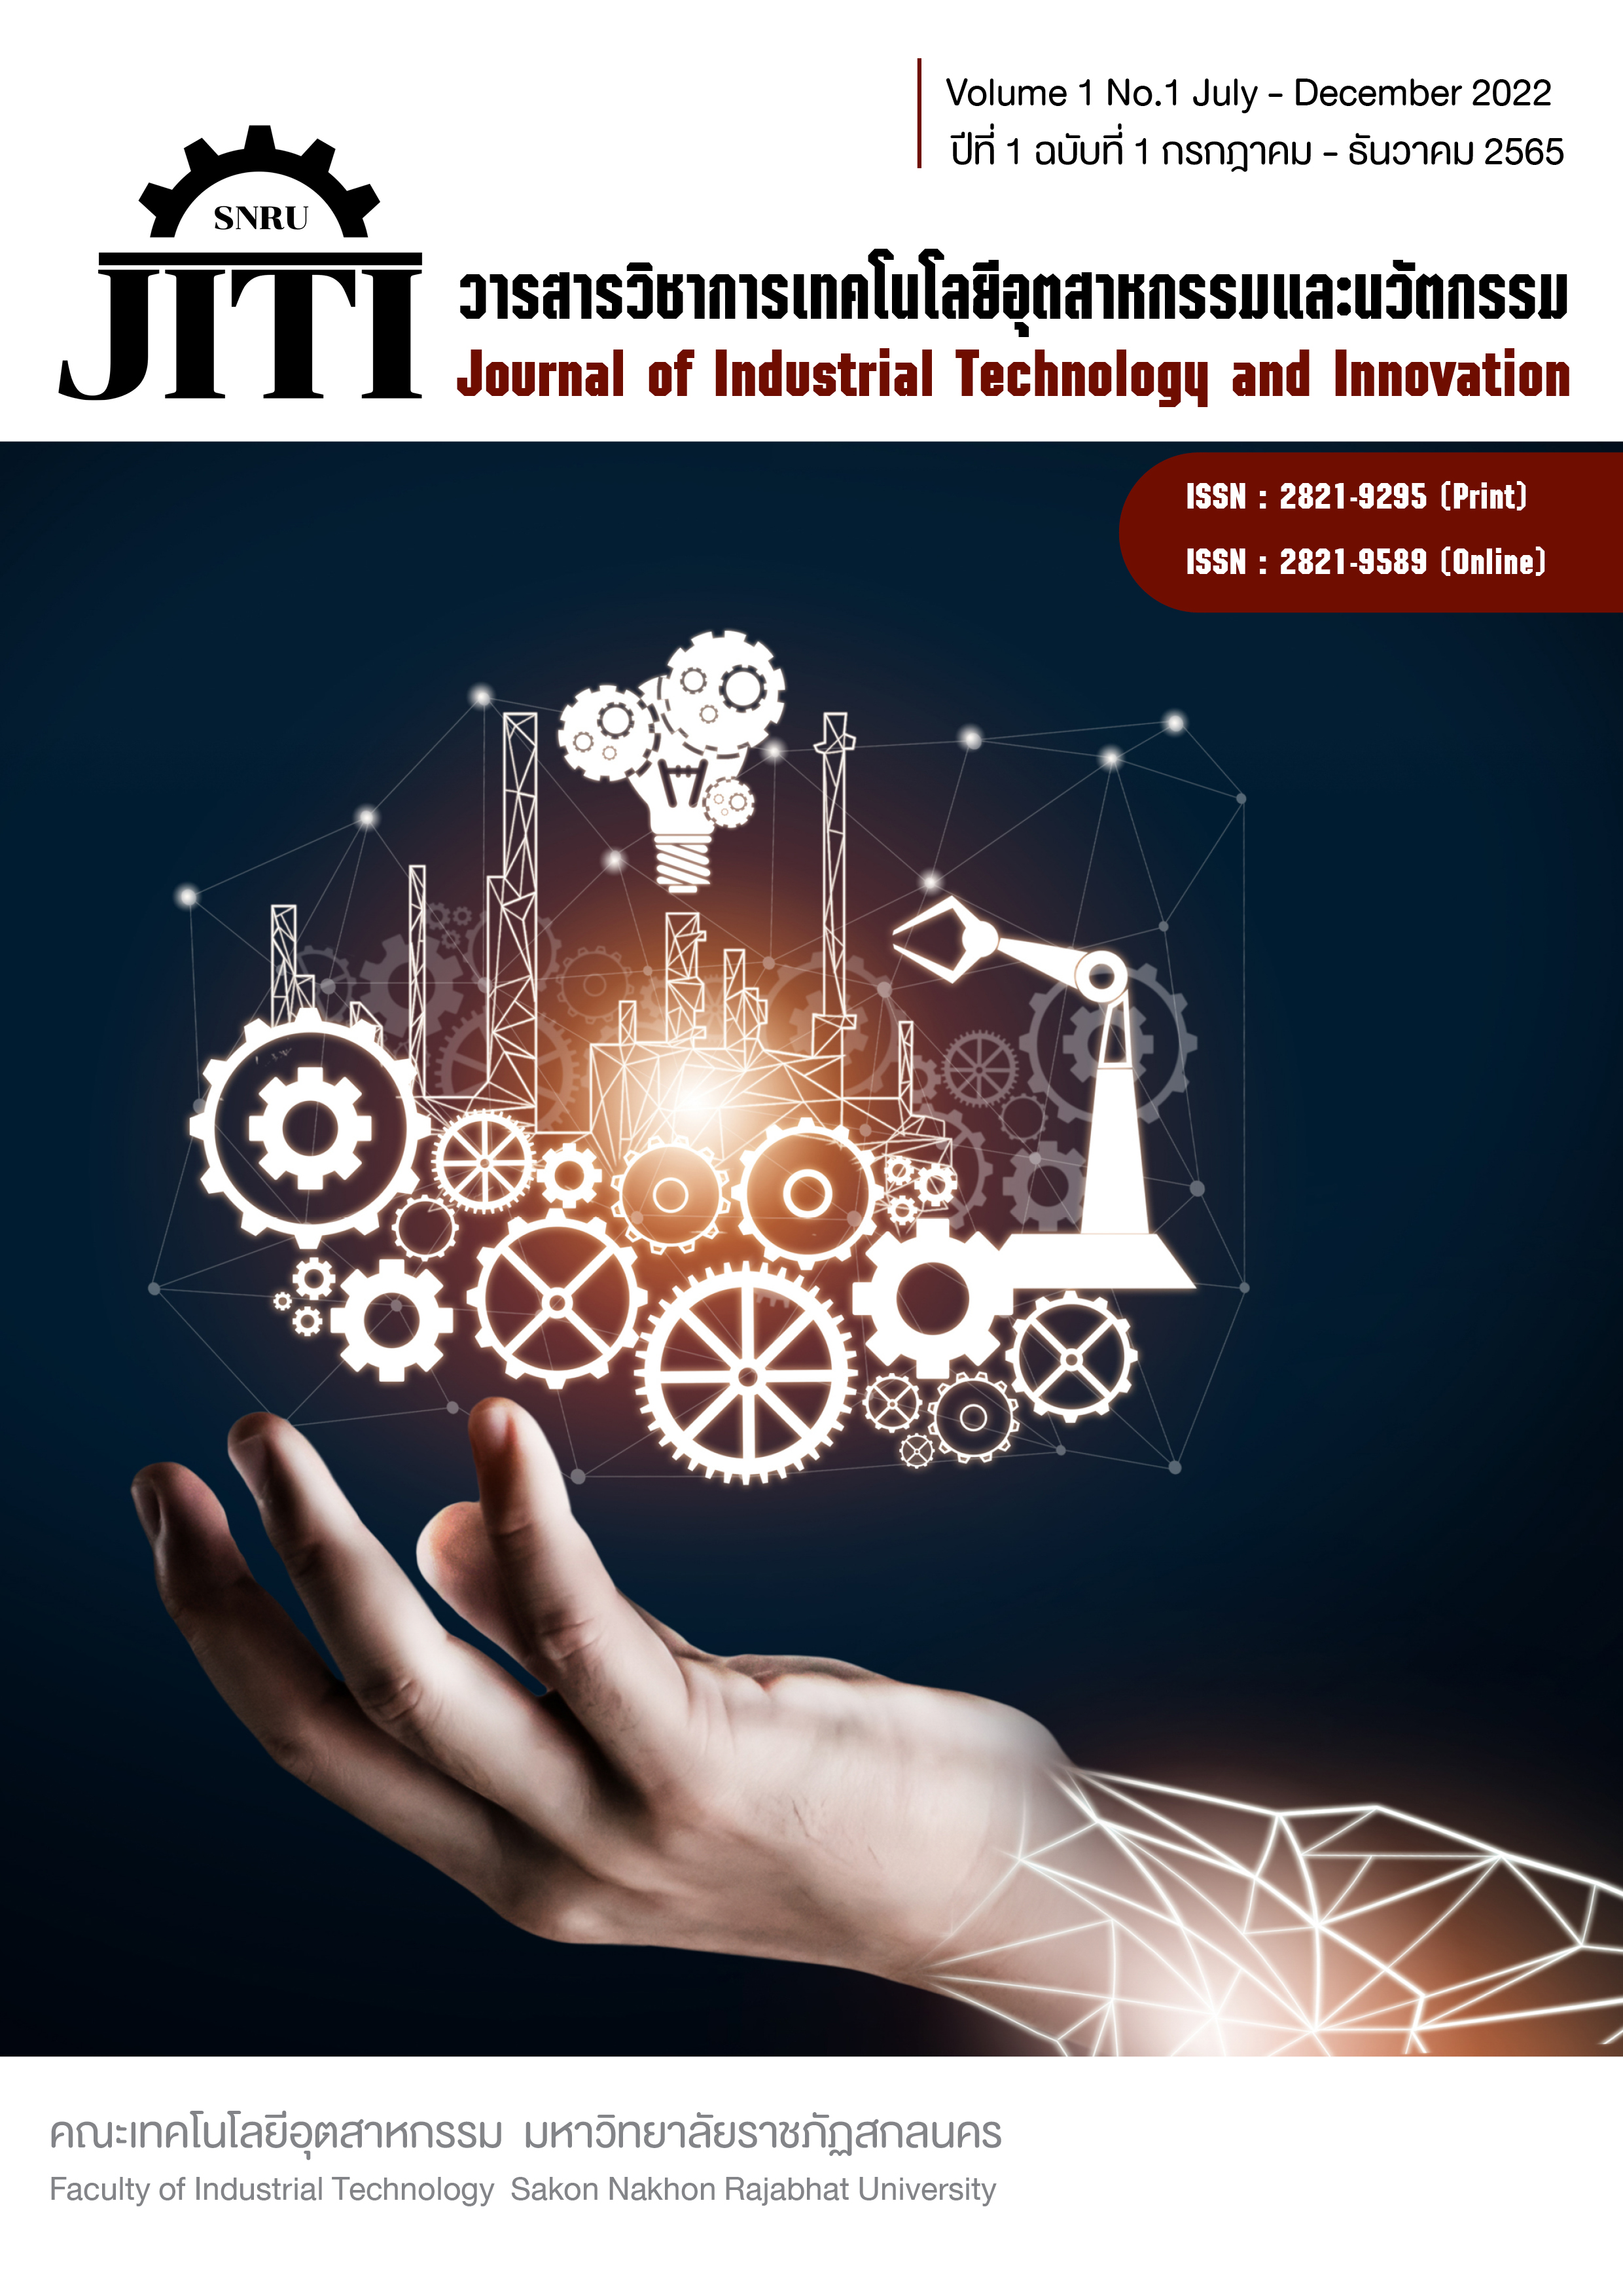 					View Vol. 1 No. 1 (2022): Journal of Industrial Technology and Innovation (July - December 2022)
				